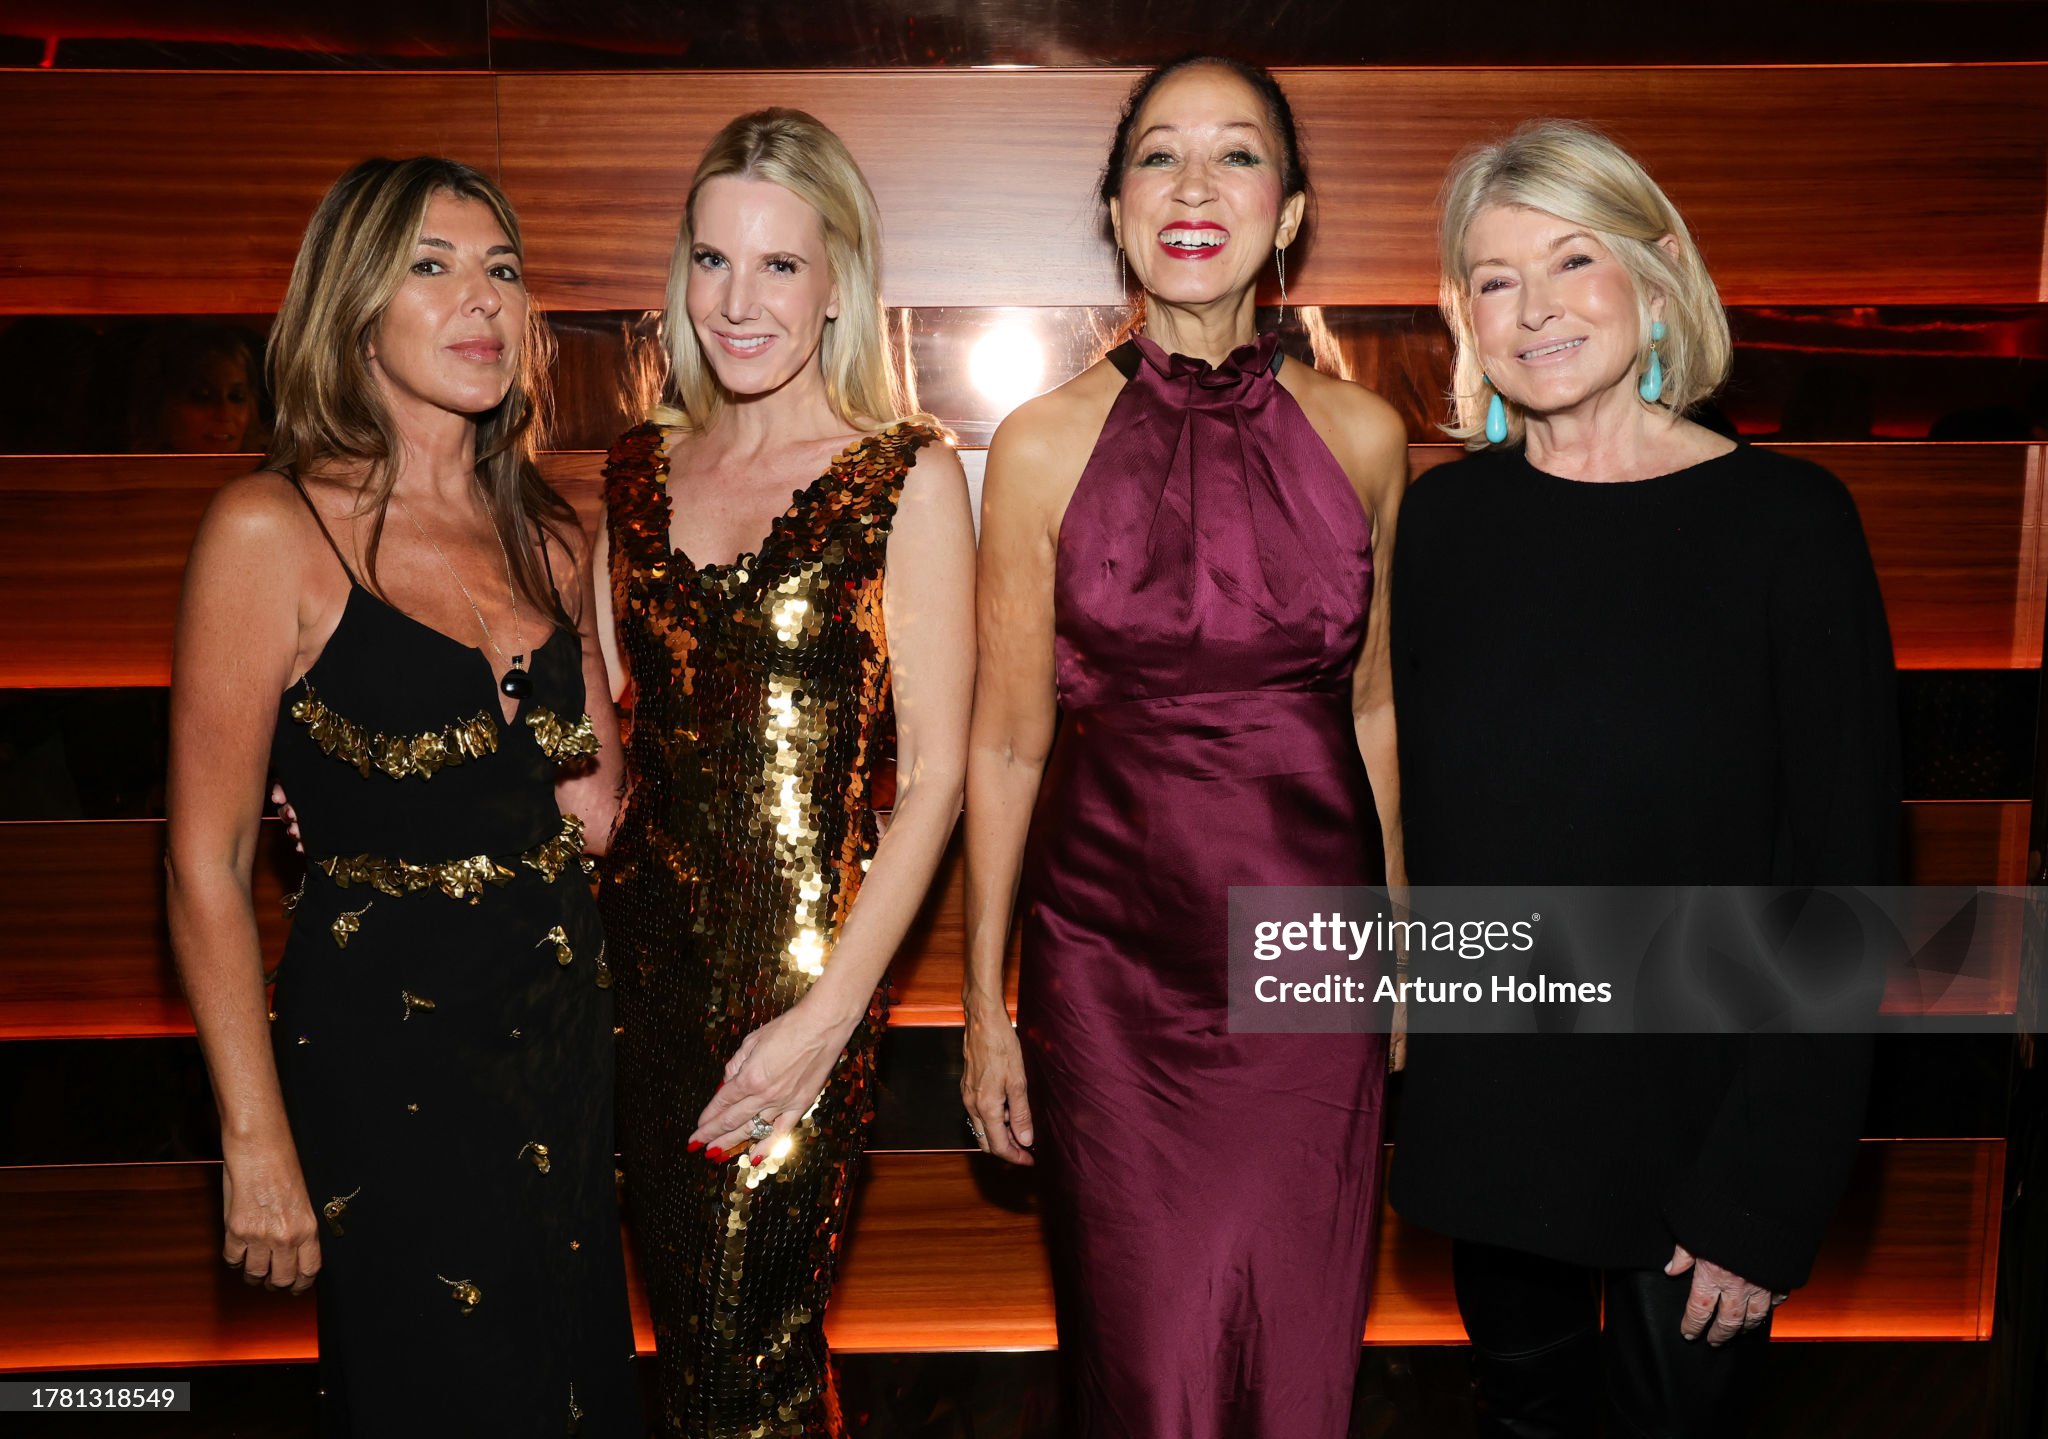 https://media.gettyimages.com/id/1781318549/photo/nina-garcia-alice-naylor-leyland-celebrate-tablescape-and-holiday-collection.jpg?s=2048x2048&w=gi&k=20&c=HhXK7dgy024VqsIRzmng7dTJSvEtKaiStqxsK3zlb7E=